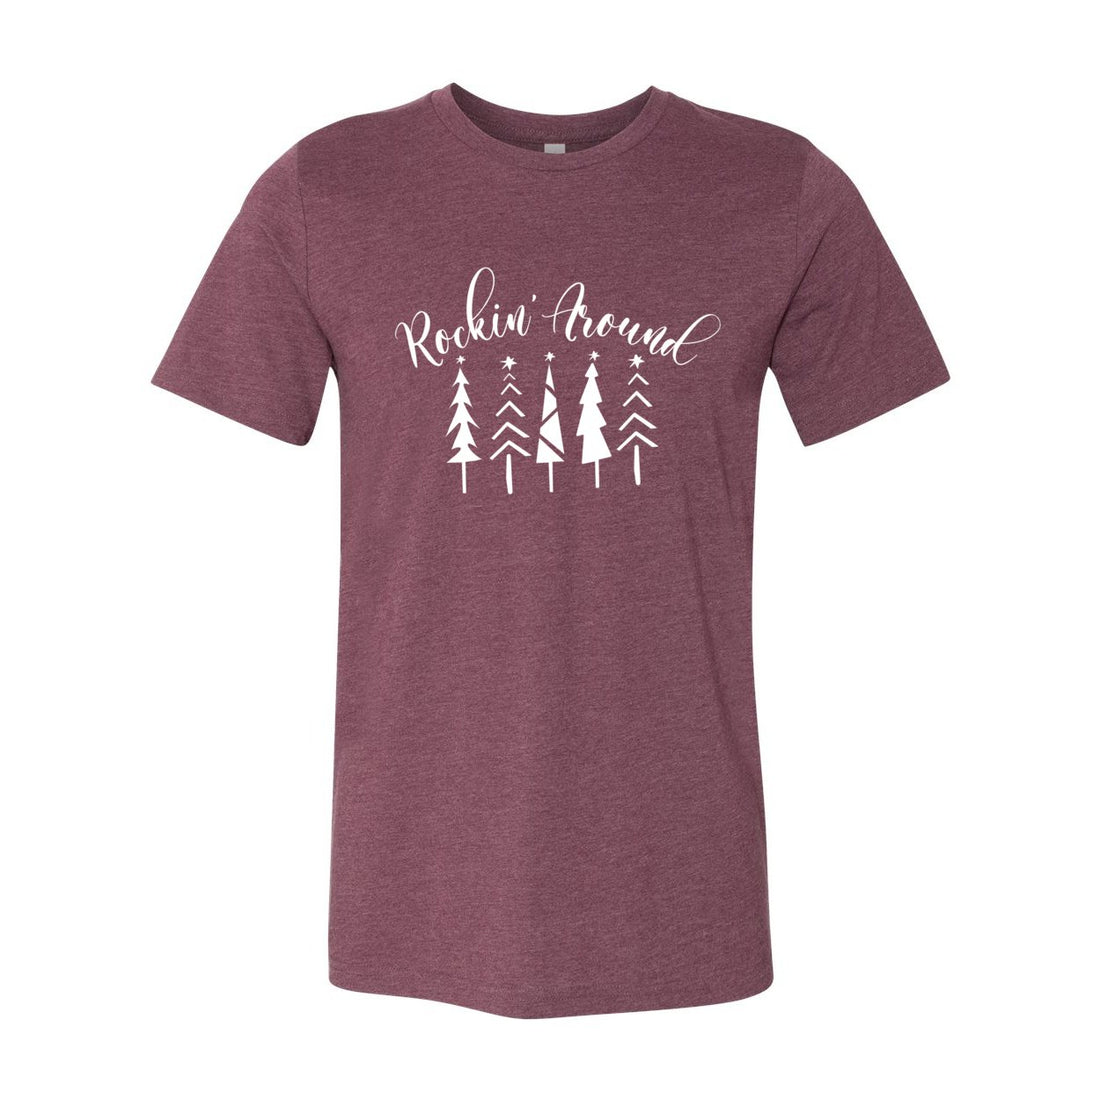 Rockin' Around The Tree - T-Shirts - Positively Sassy - Rockin' Around The Tree